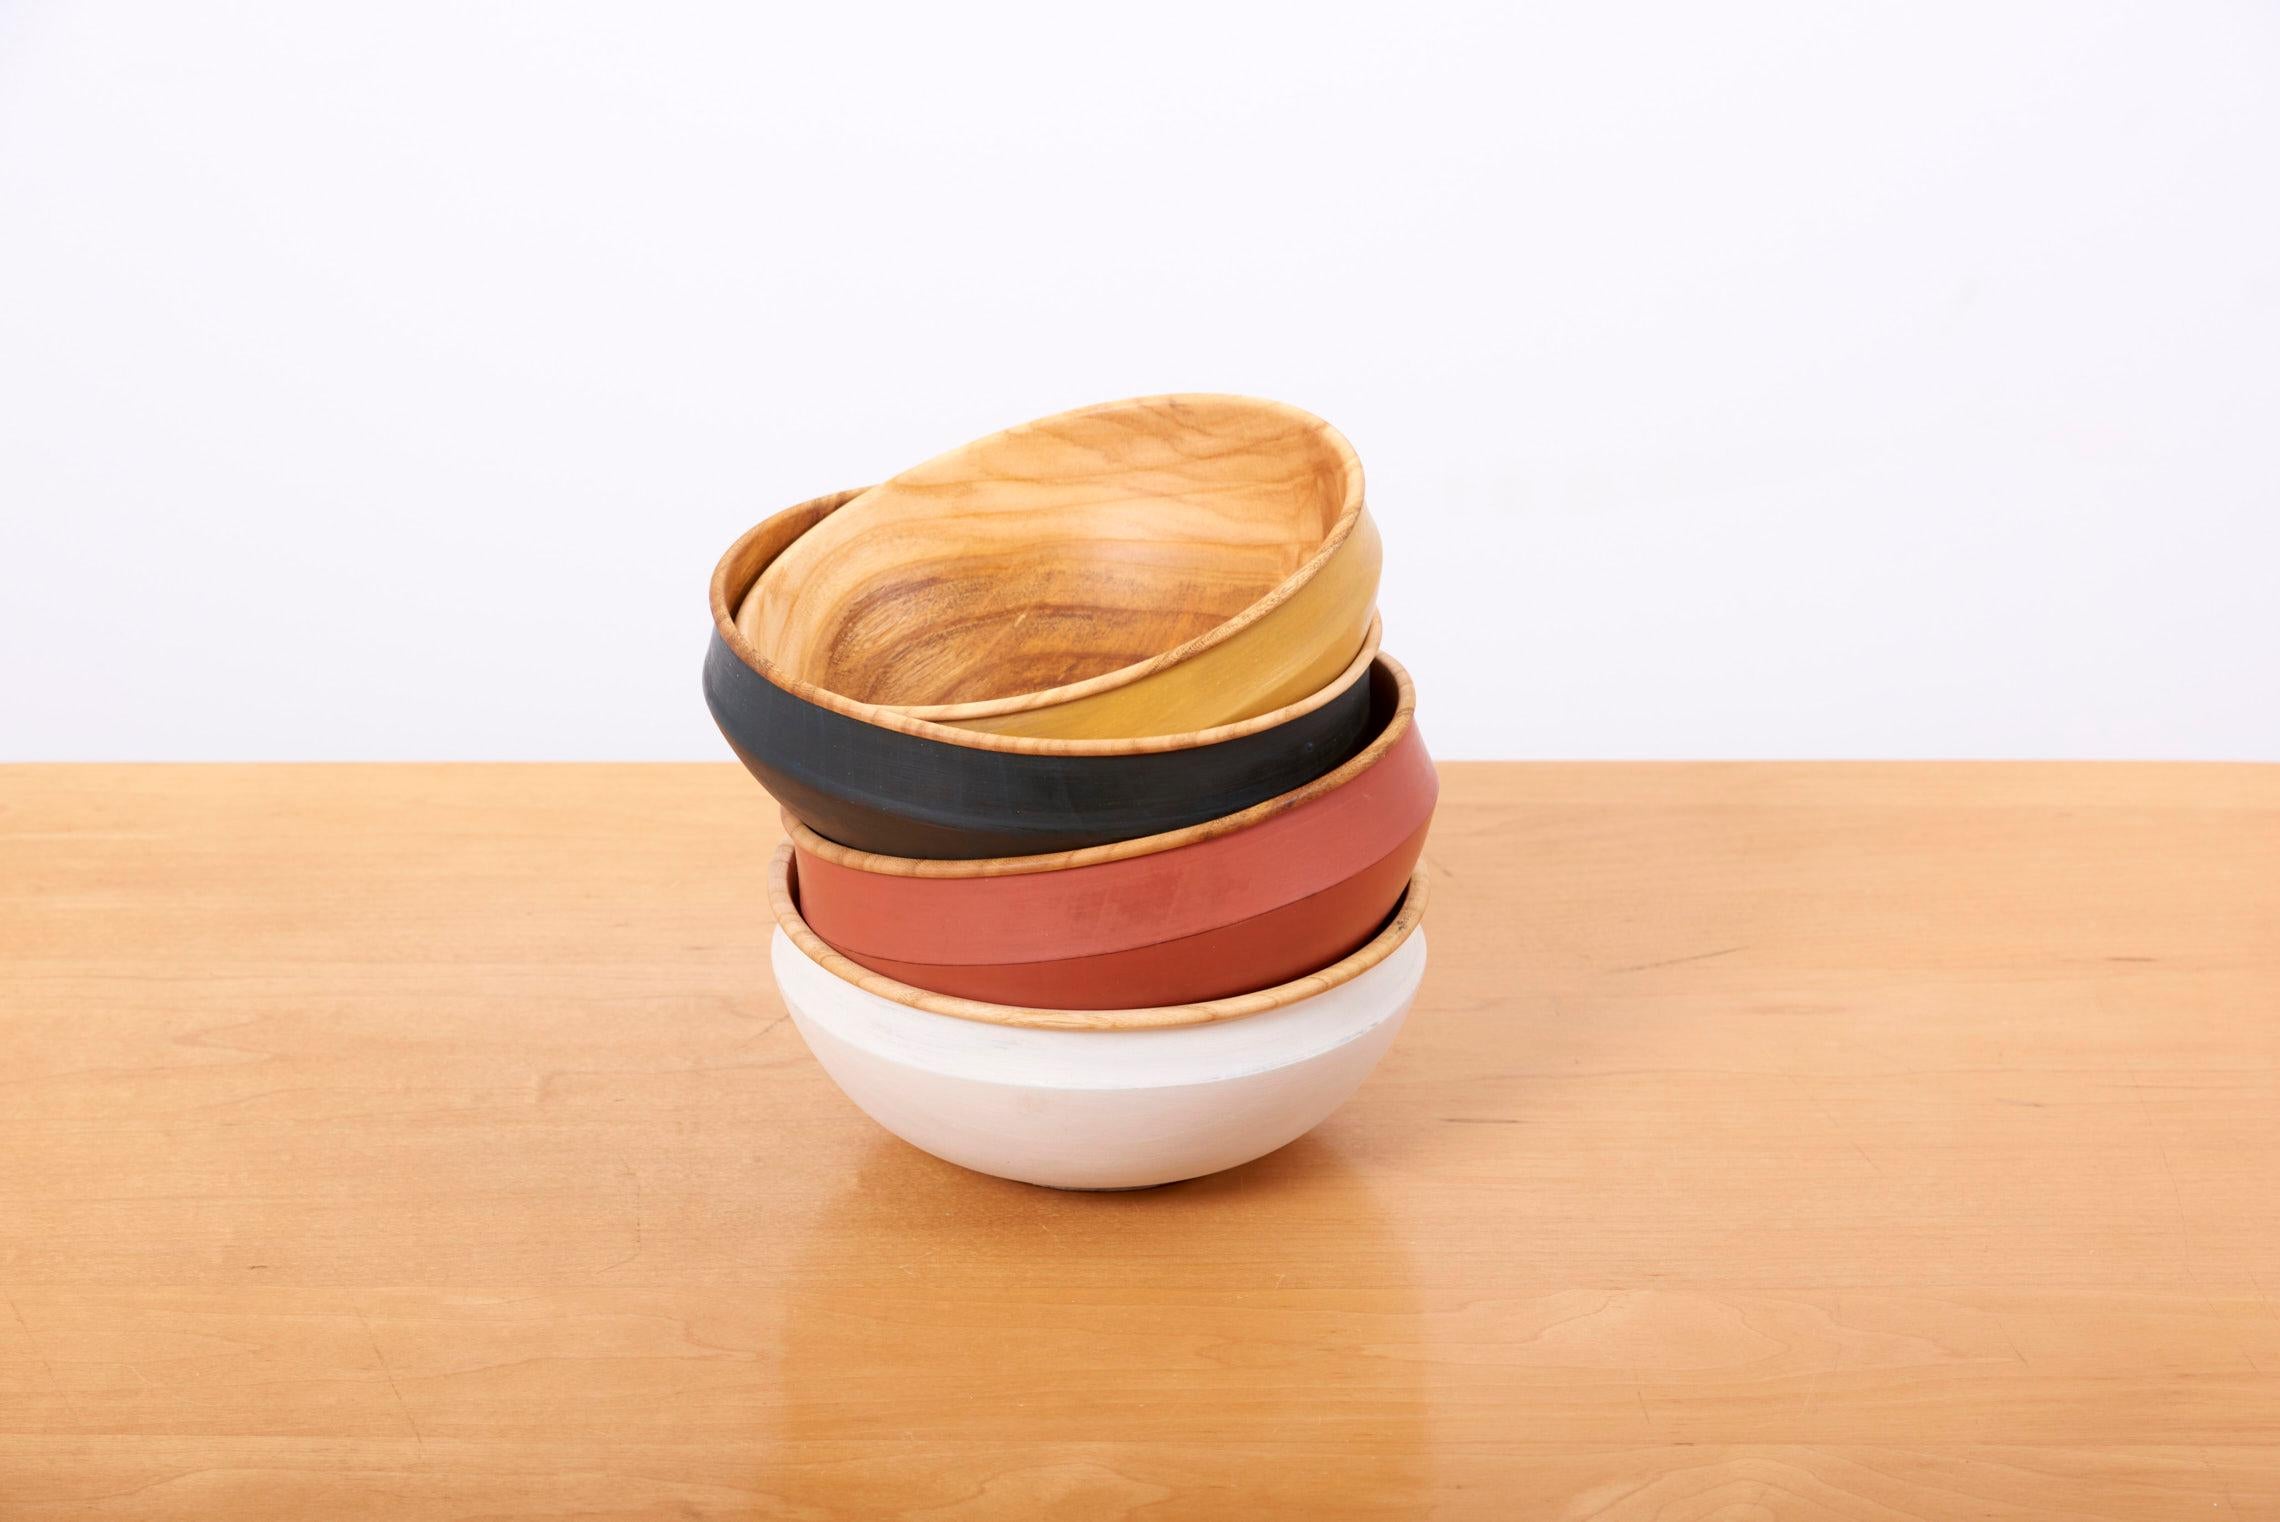 American Craftsman Set of 4 Wooden Bowls by Fabian Fischer, Germany, 2020 For Sale